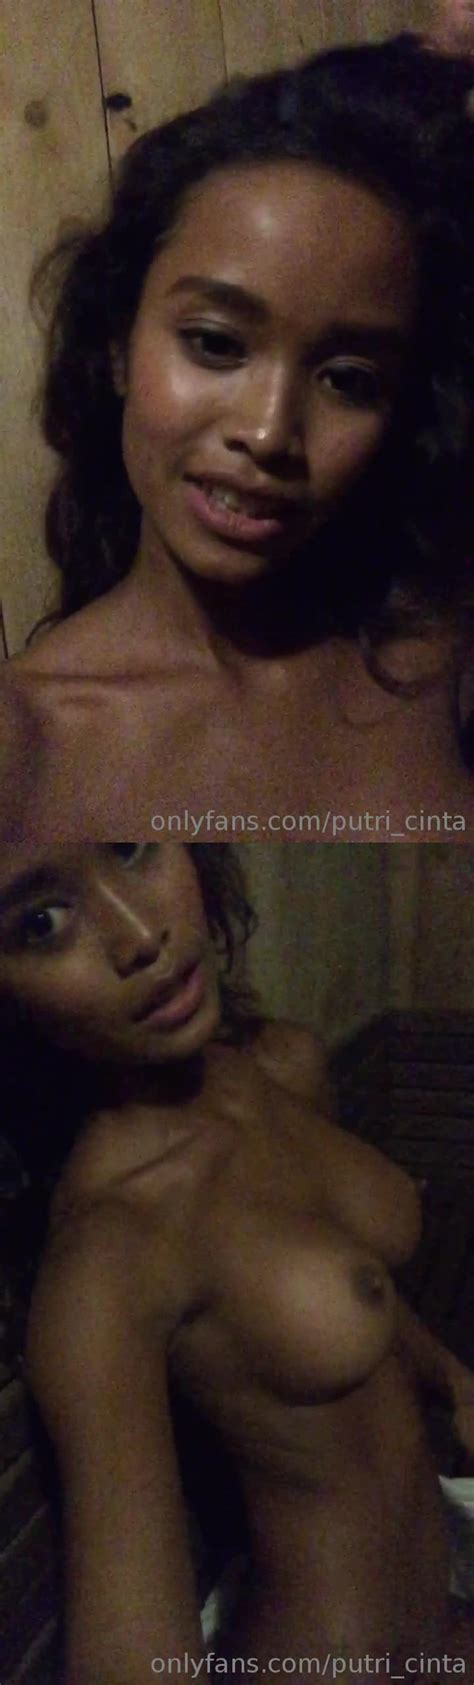 Putri Cinta A Very Beautiful Maiden With Gorgeous Breasts Page 5